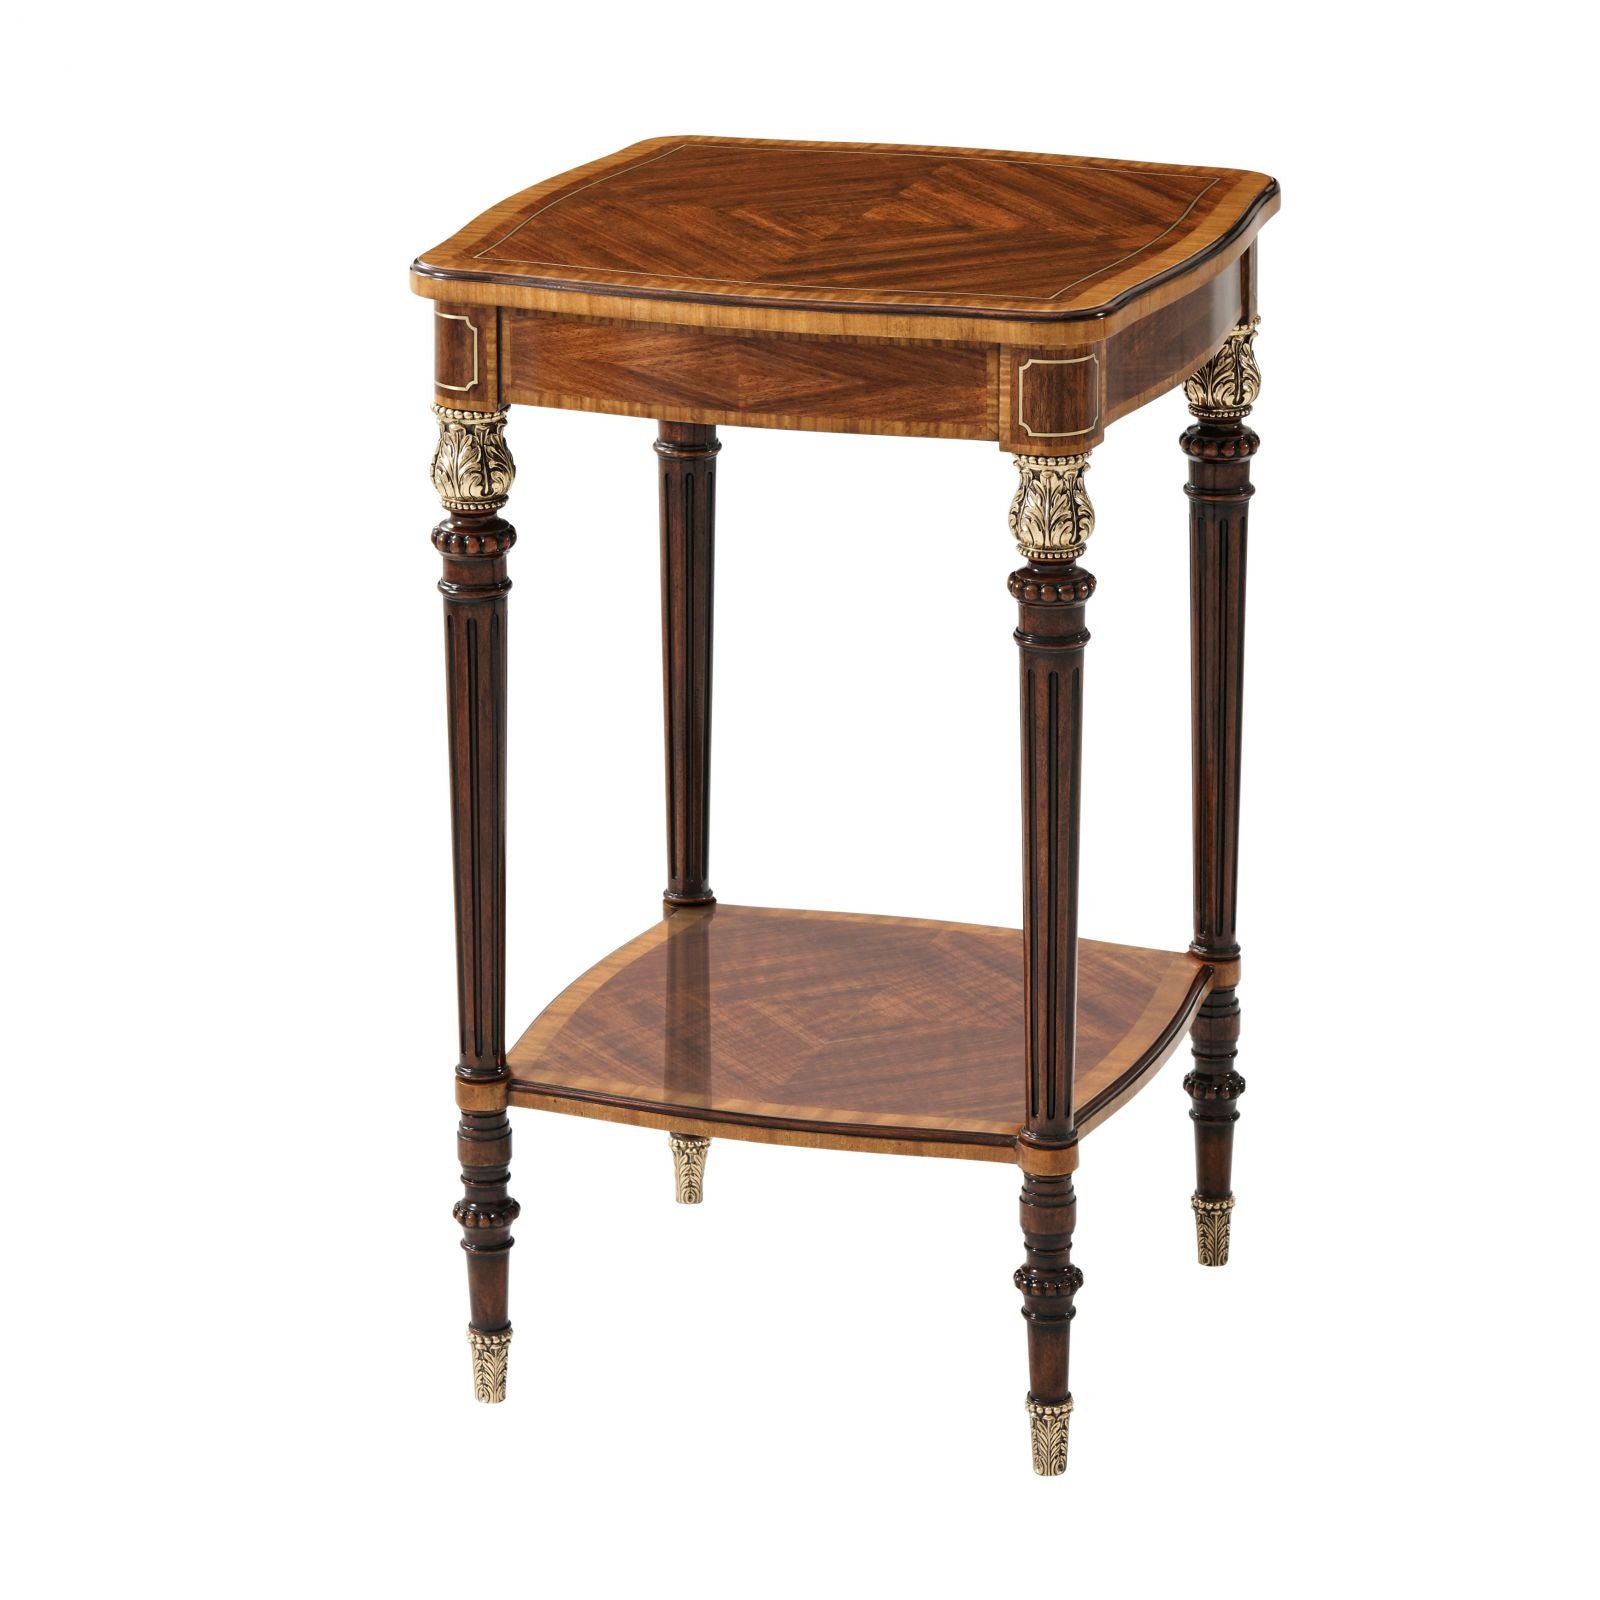 Mahogany and brass side table